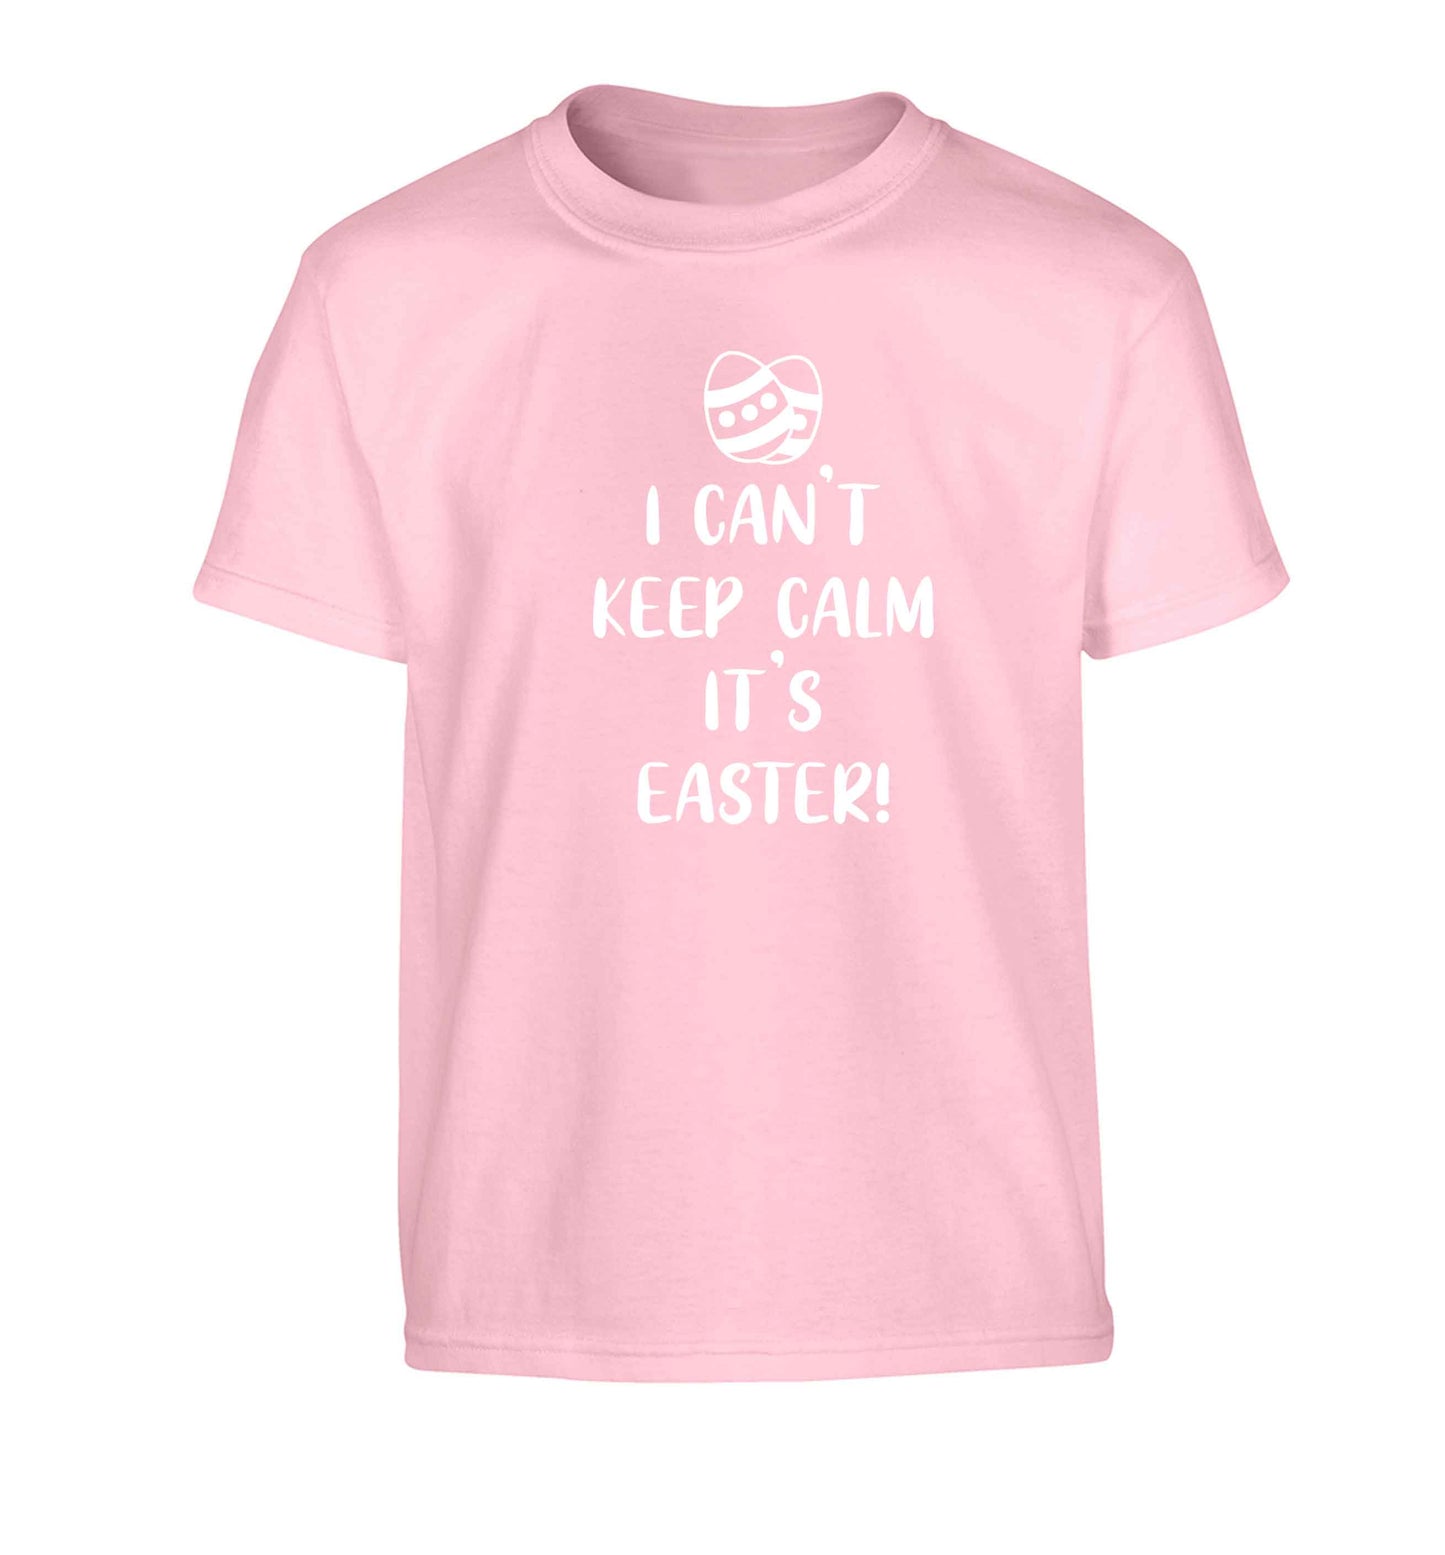 I can't keep calm it's Easter Children's light pink Tshirt 12-13 Years